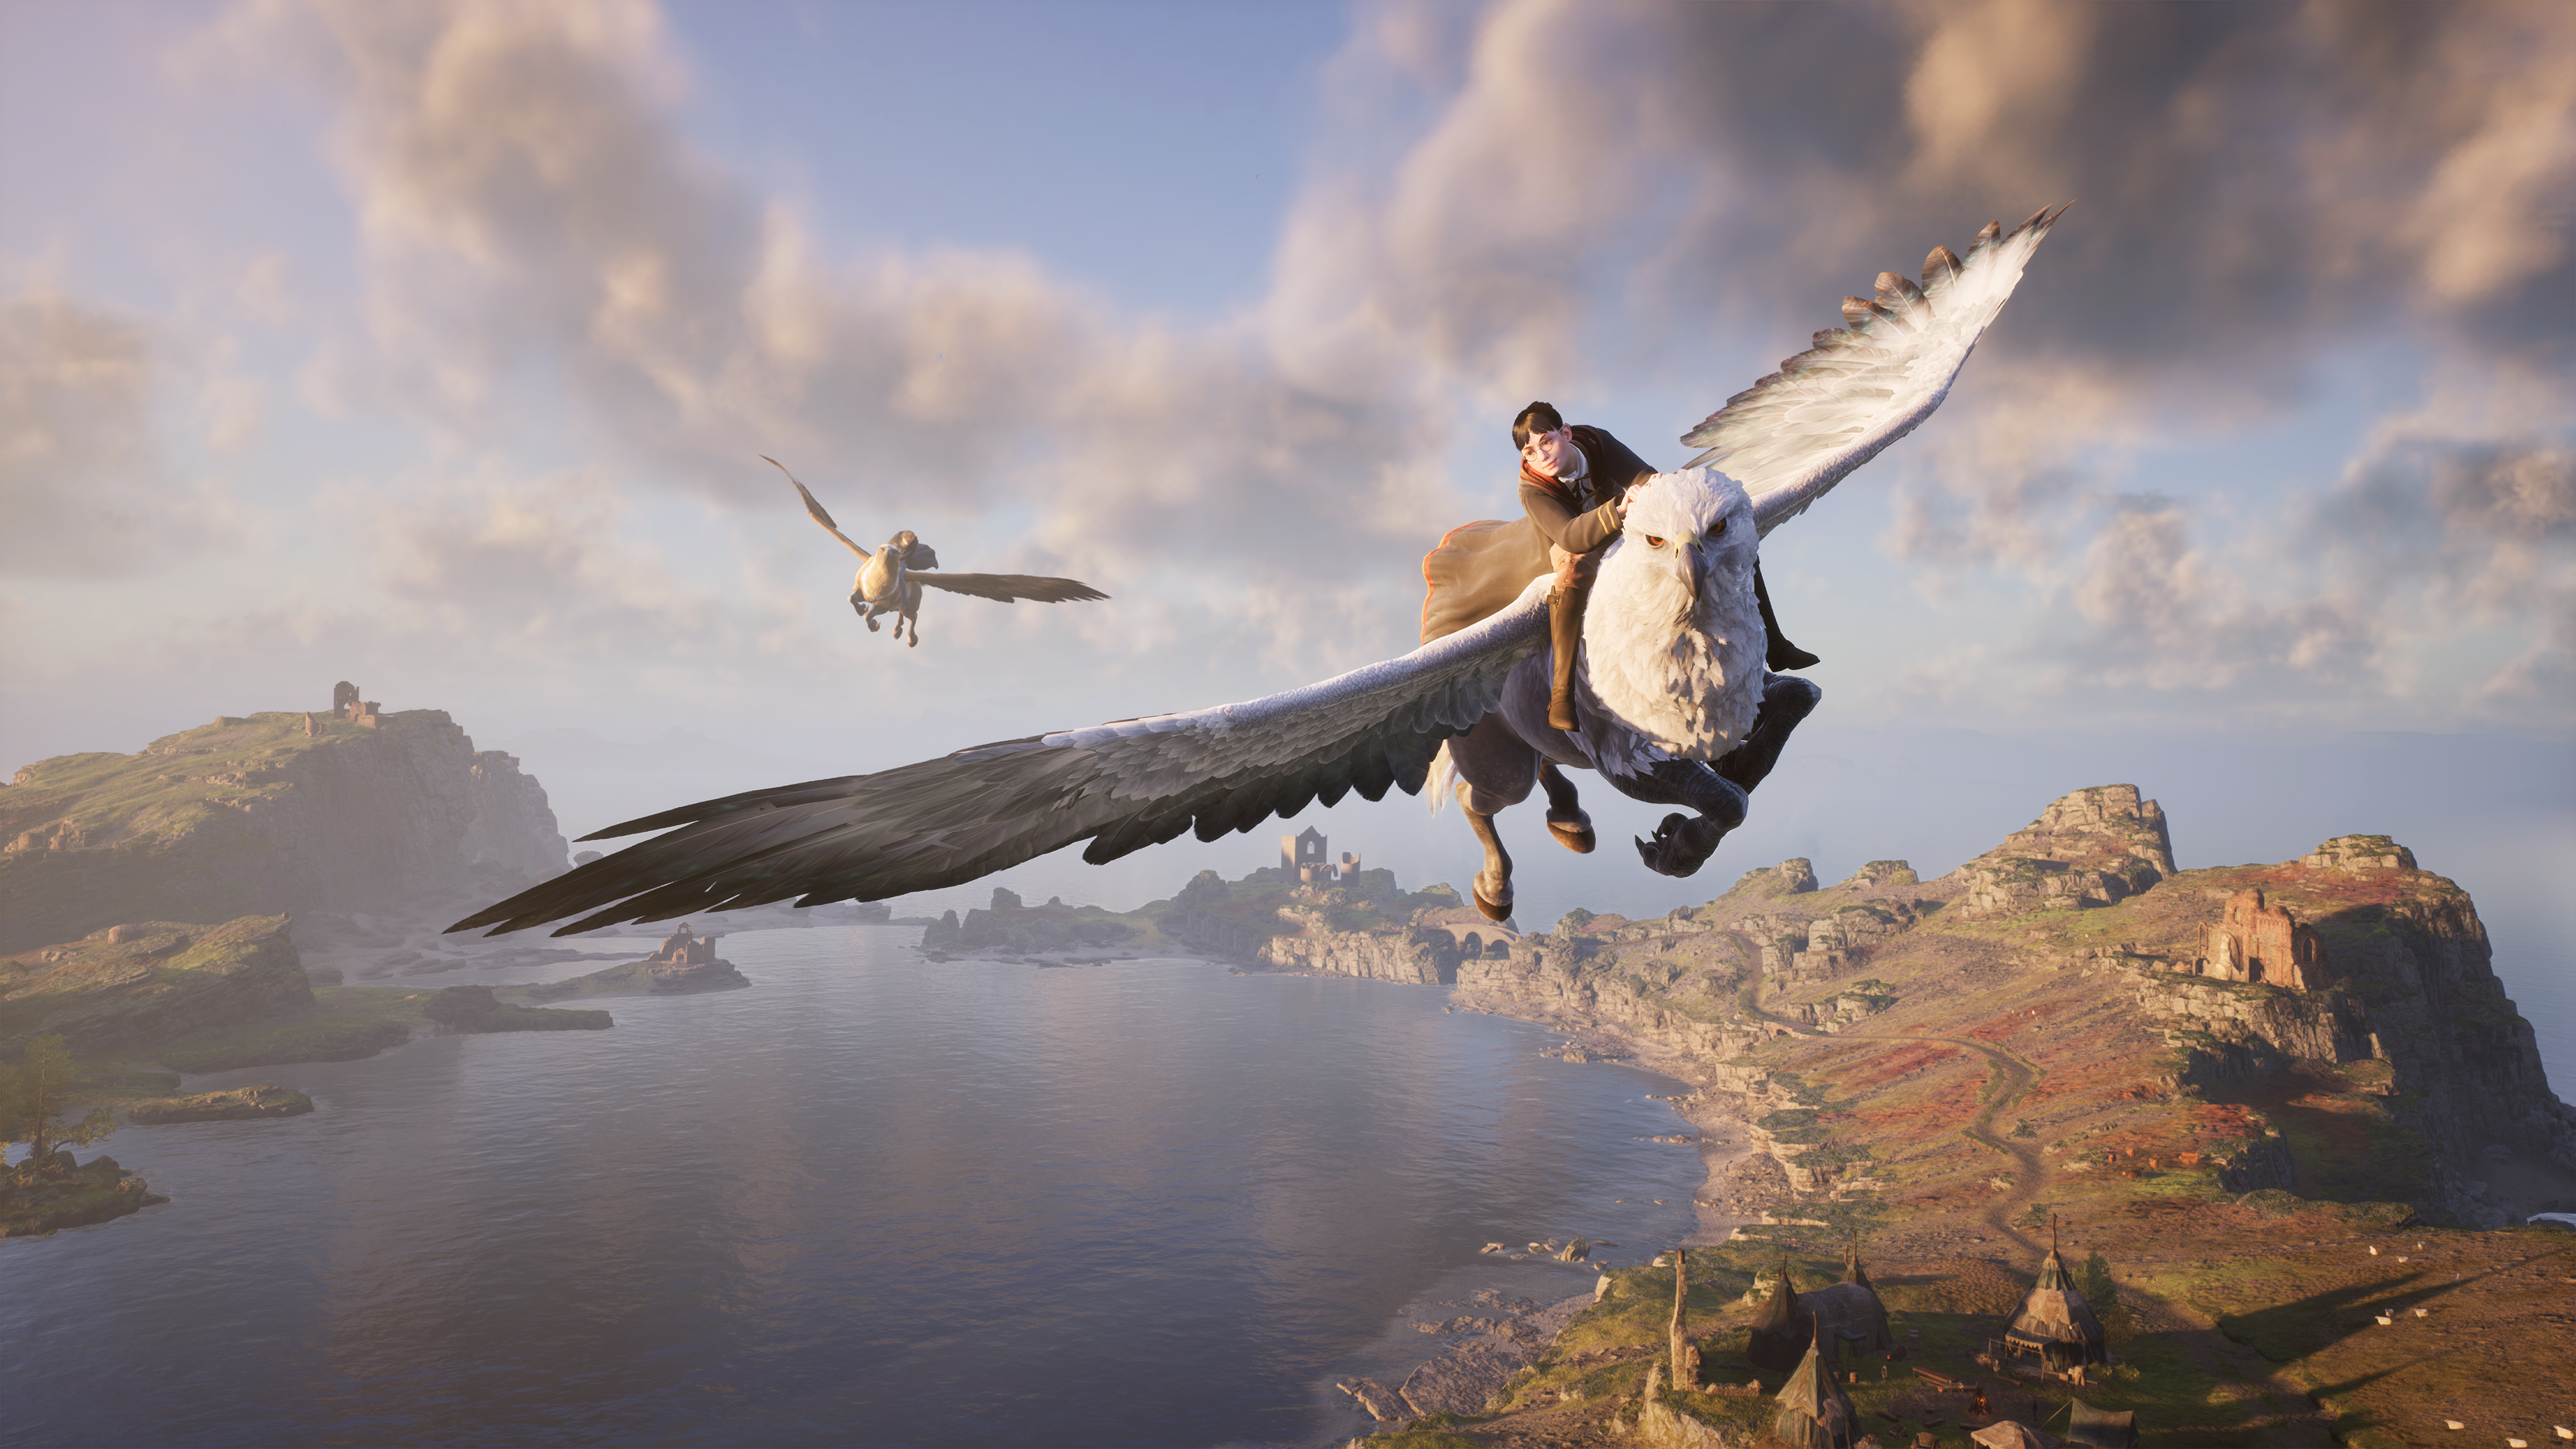 A still from Hogwarts Legacy trailer showing a student riding a Hippogriff